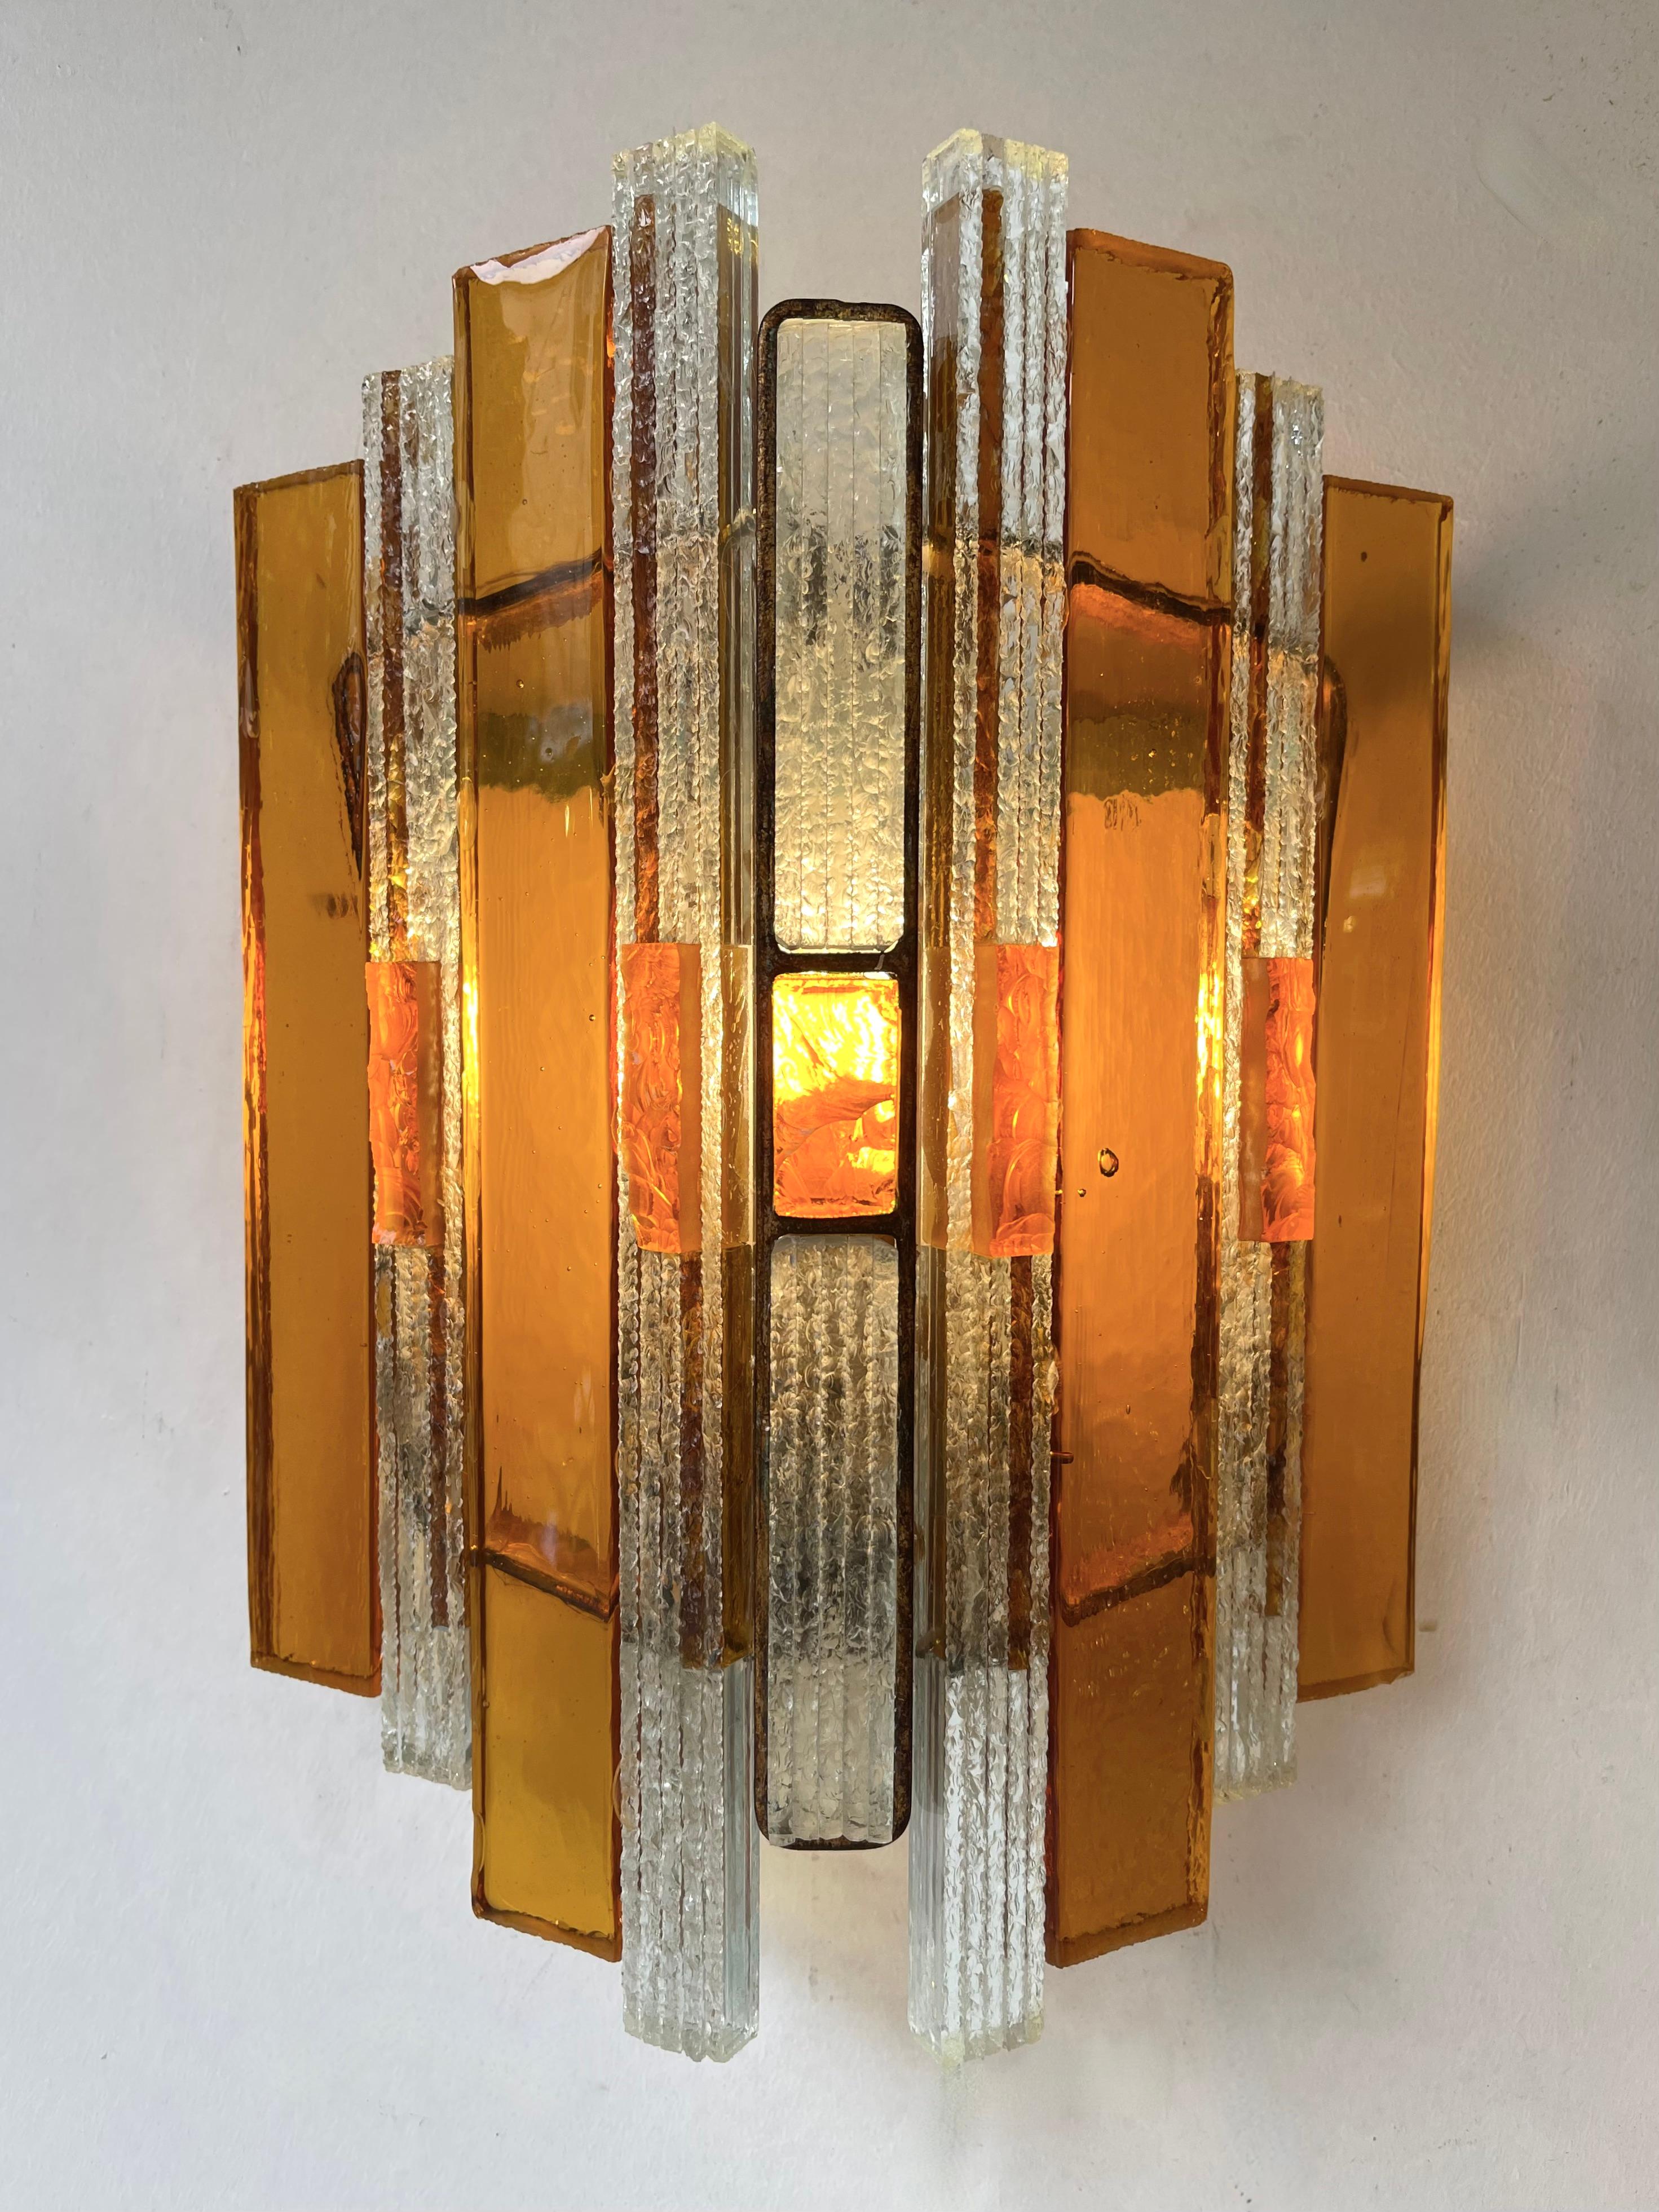 Pair of Hammered Glass Wrought Iron Sconces by Longobard, Italy, 1970s For Sale 6